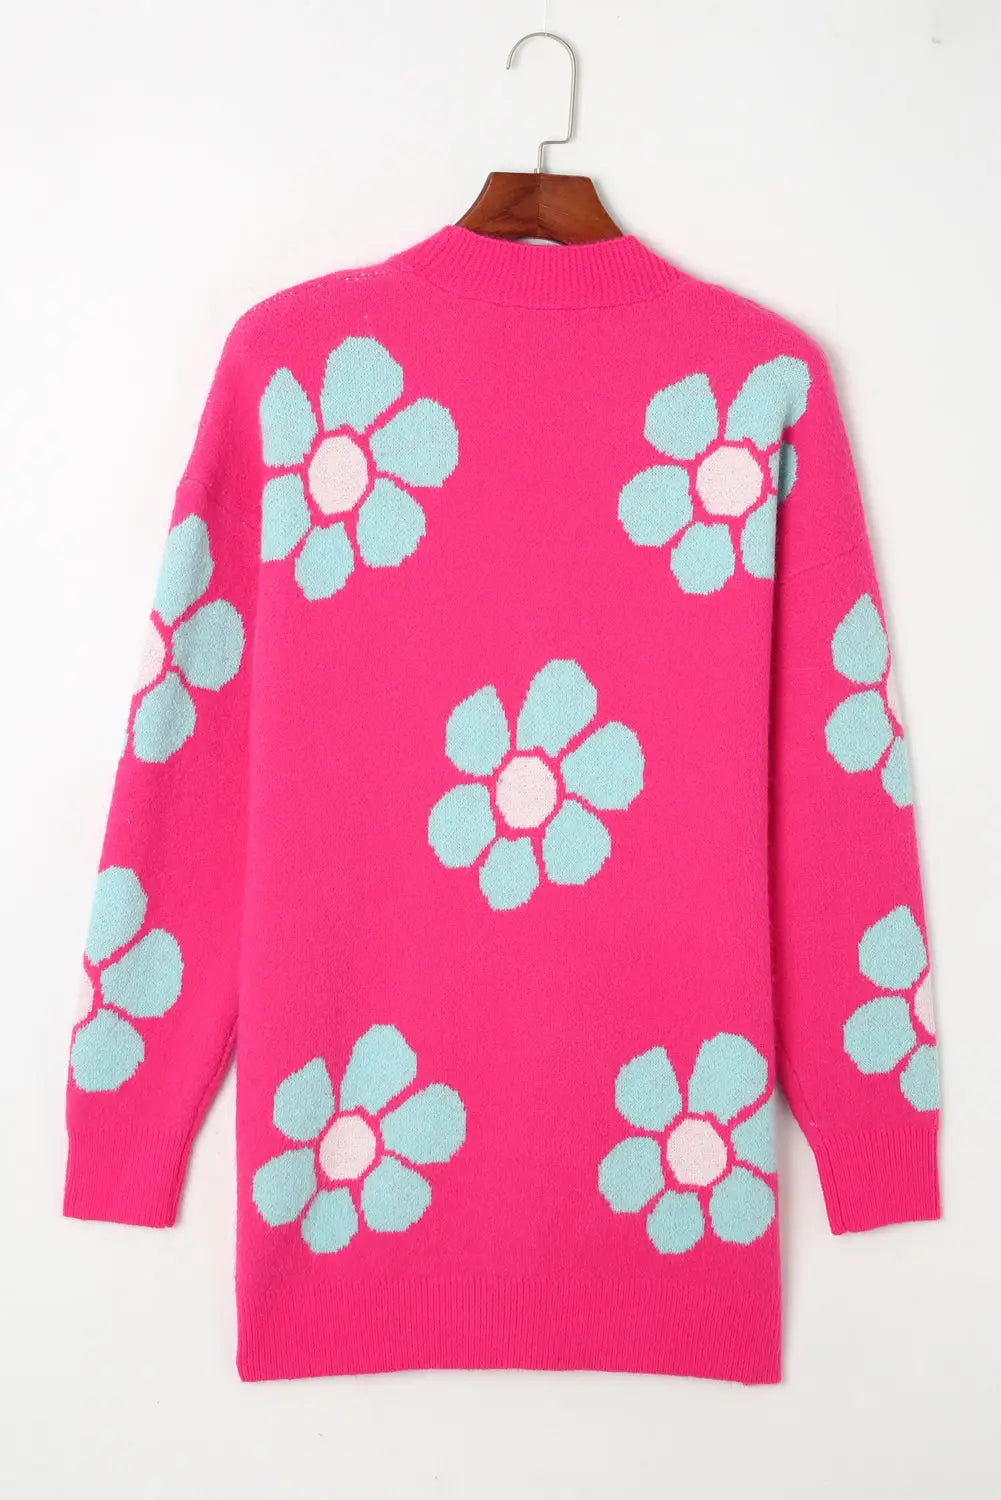 Strawberry pink floral print button up knitted cardigan - sweaters & cardigans